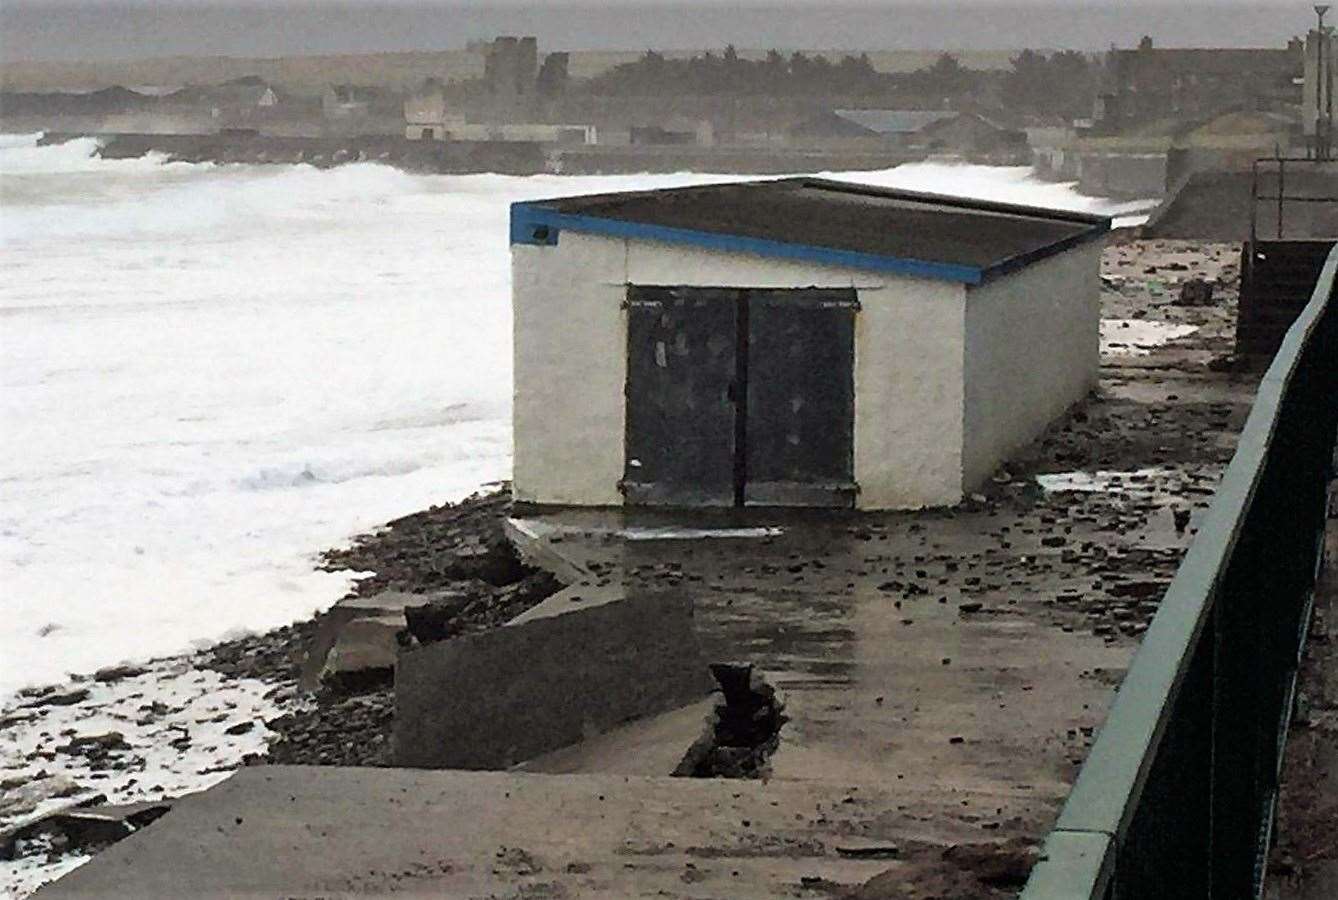 The Esplanade and canoe club hut after the storm damage. Highland Council has now cordoned off the area to make it safe. Picture: PCC